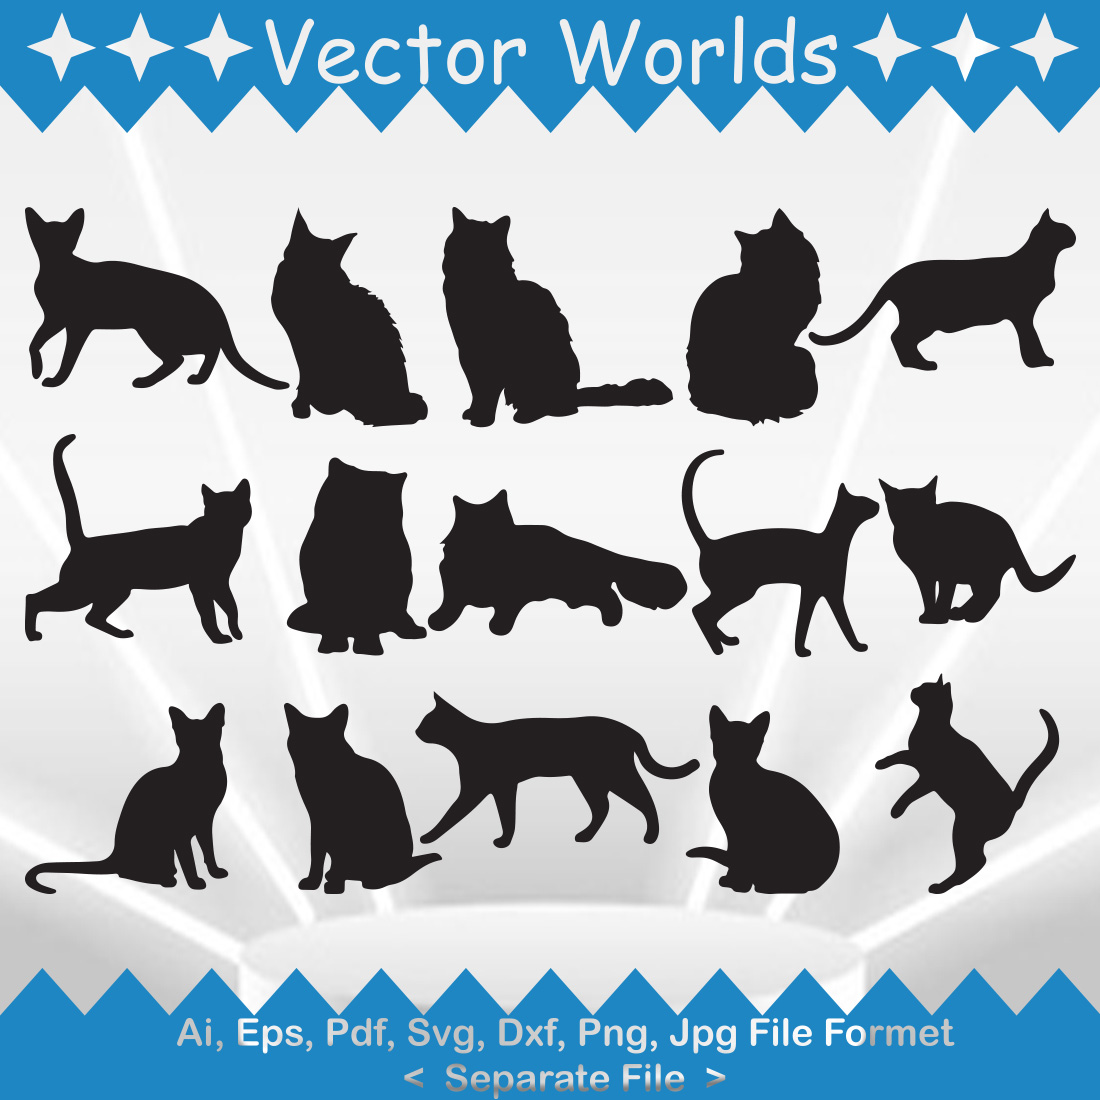 Set of cats silhouettes on a blue background.